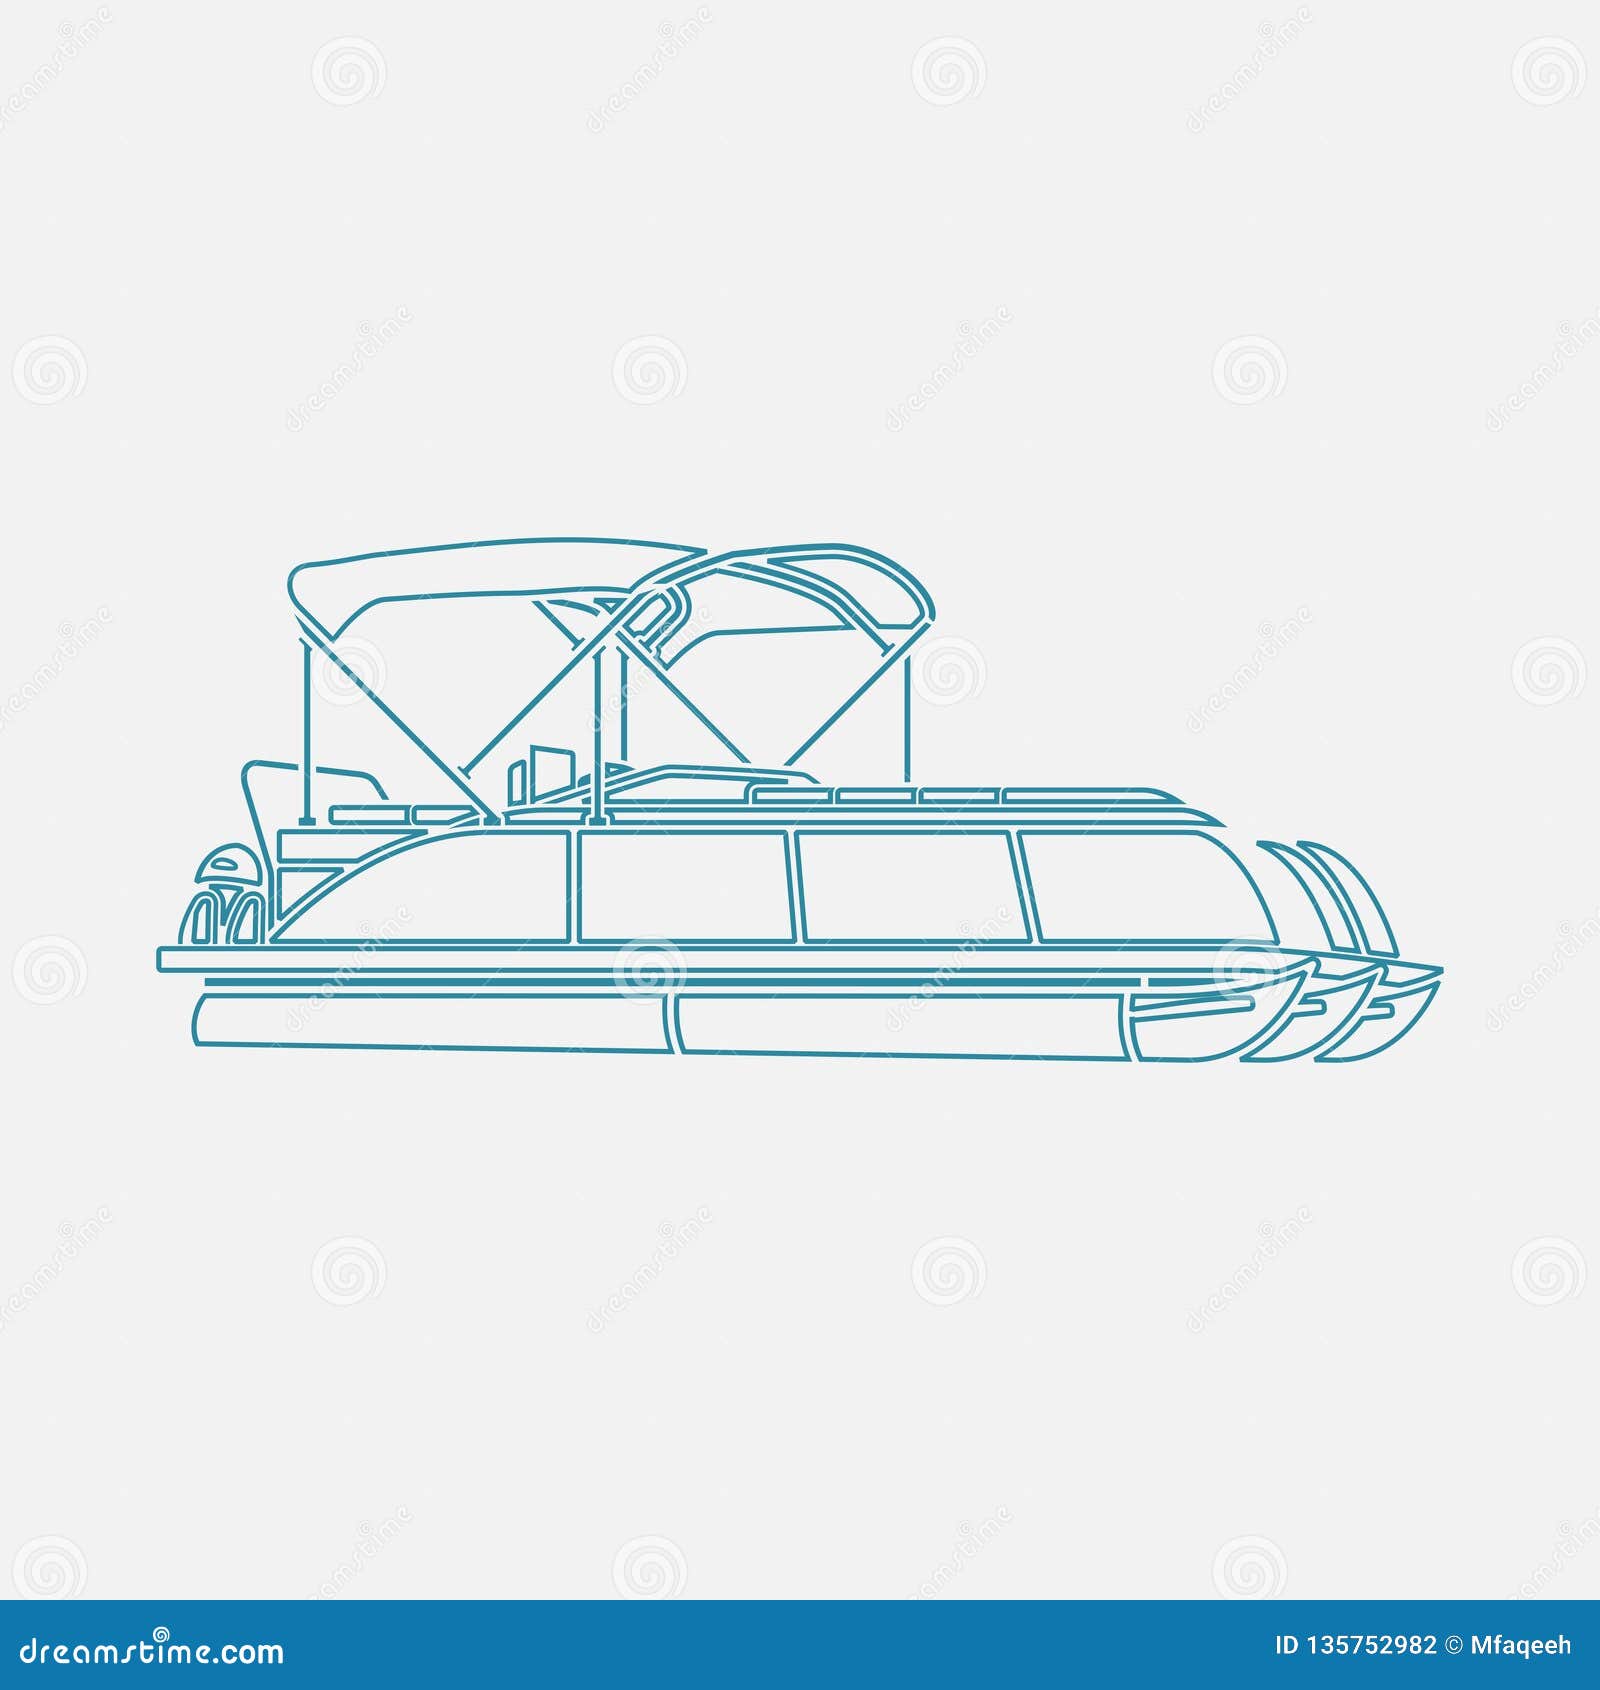 outline style semi-oblique side view pontoon boat  